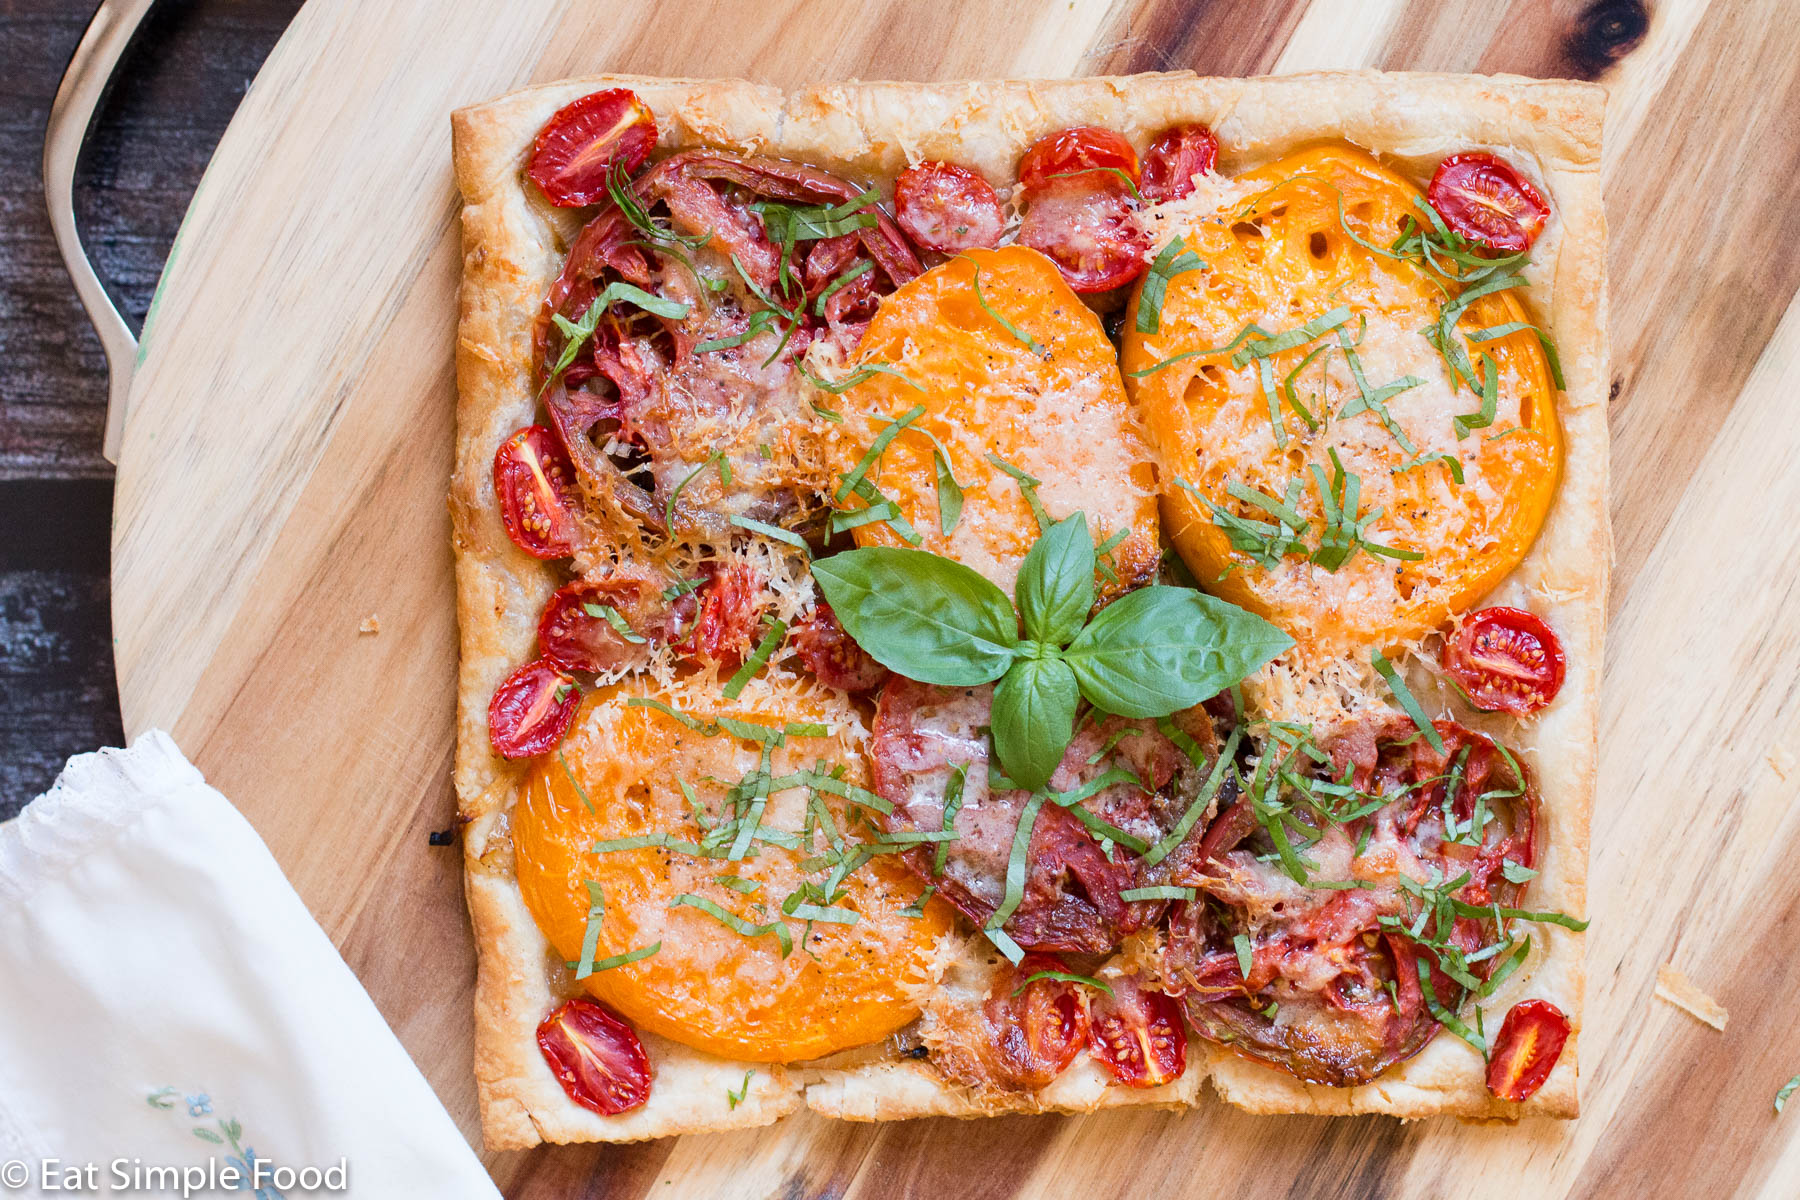 Tomato Tart with different sizes and colors of tomatoes on golden puff pastry with basil leaves and sliced basil garnish.